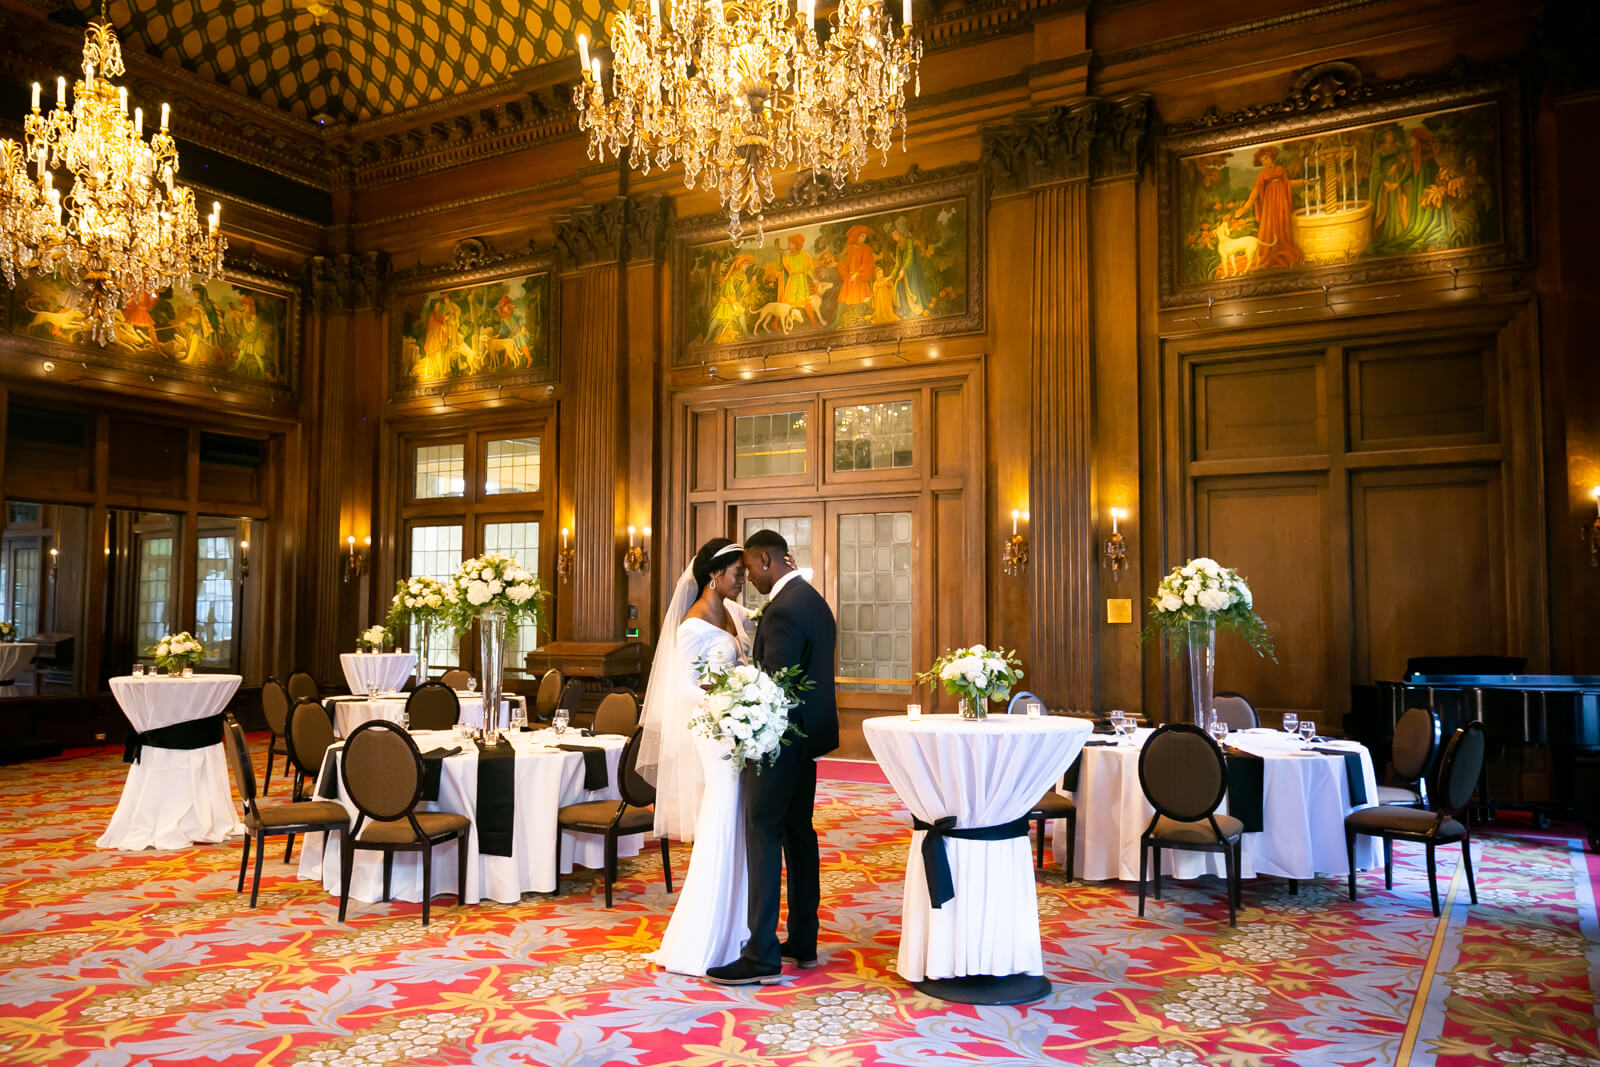 How to Pick Your Wedding Venue